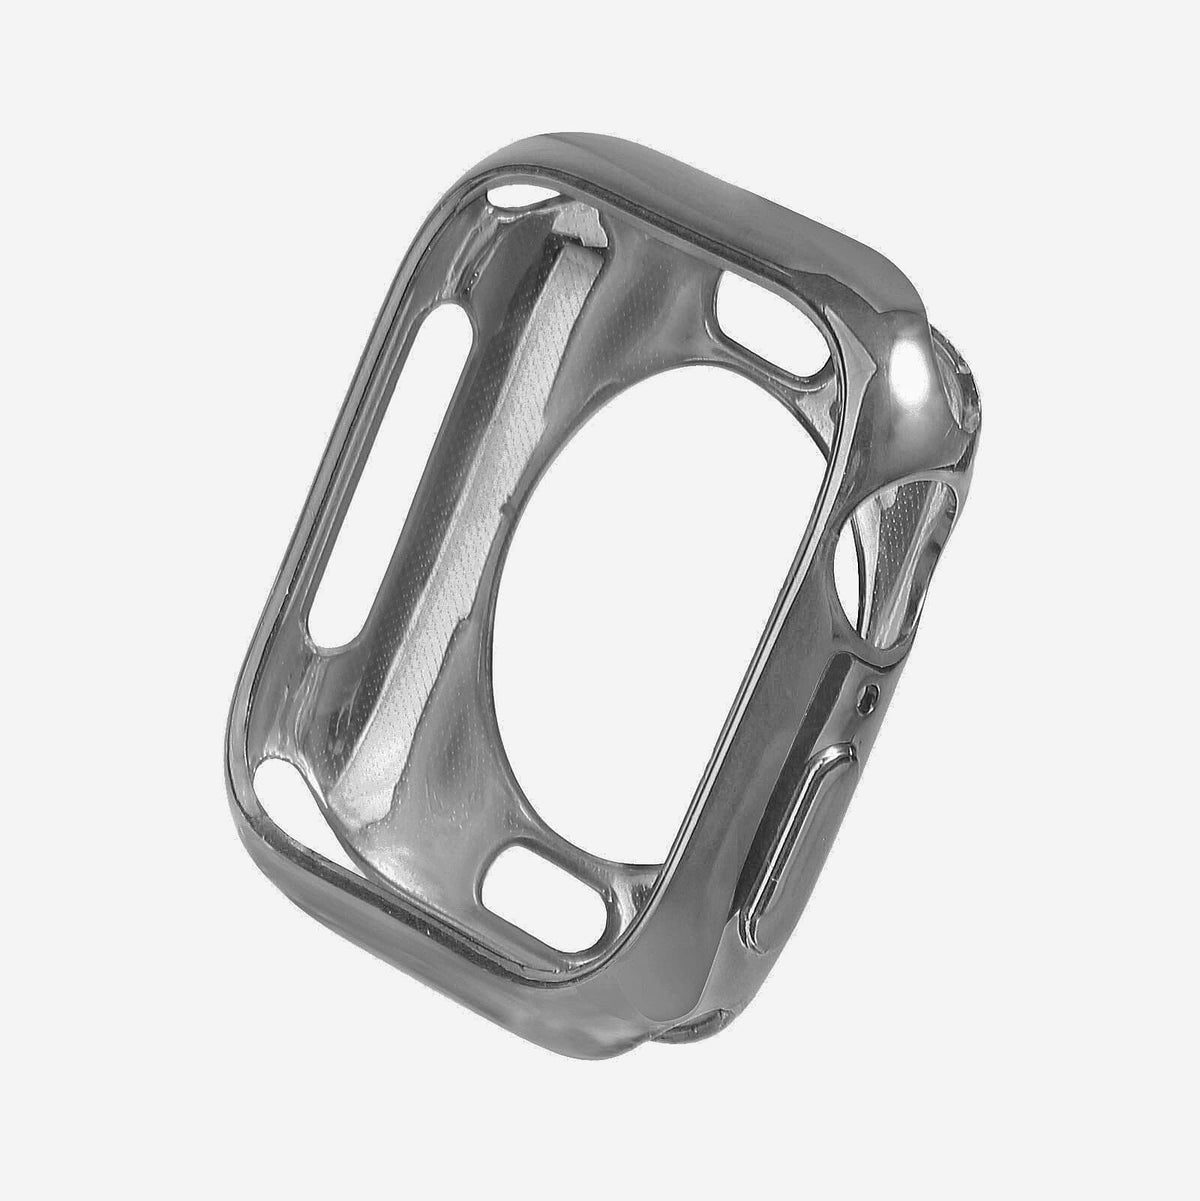 Apple Watch TPU Chrome Bumper Protection Case - Silver